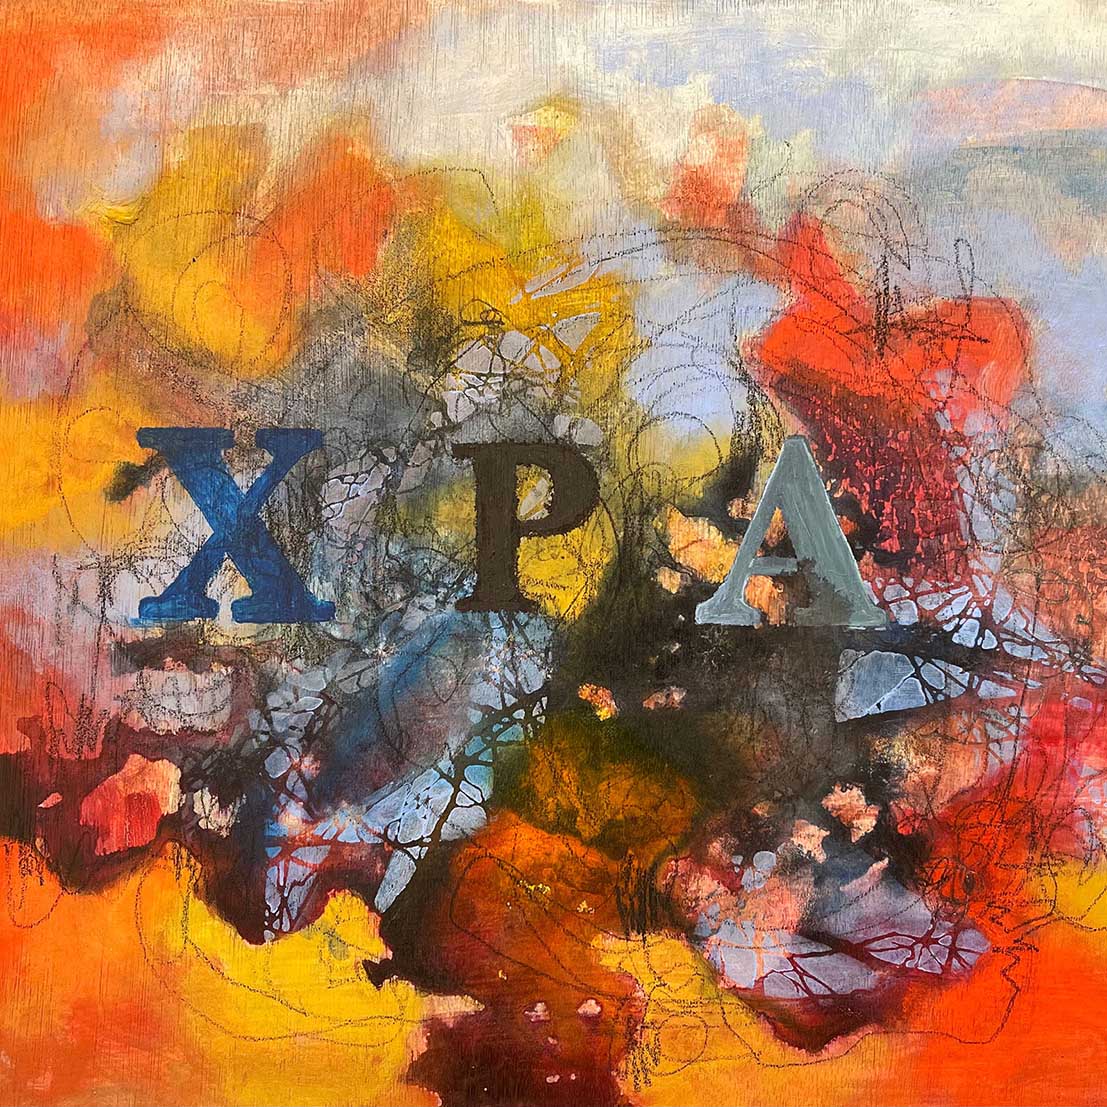 energetic, messy painting with what looks like crayon or charcoal scribbles. The background is a haze of orange, yellow, periwinkle, and dark and light grey. The letters 'XPA' are printed in a serif font over the background with each letter a different color: dark blue, dark brown, and grey.